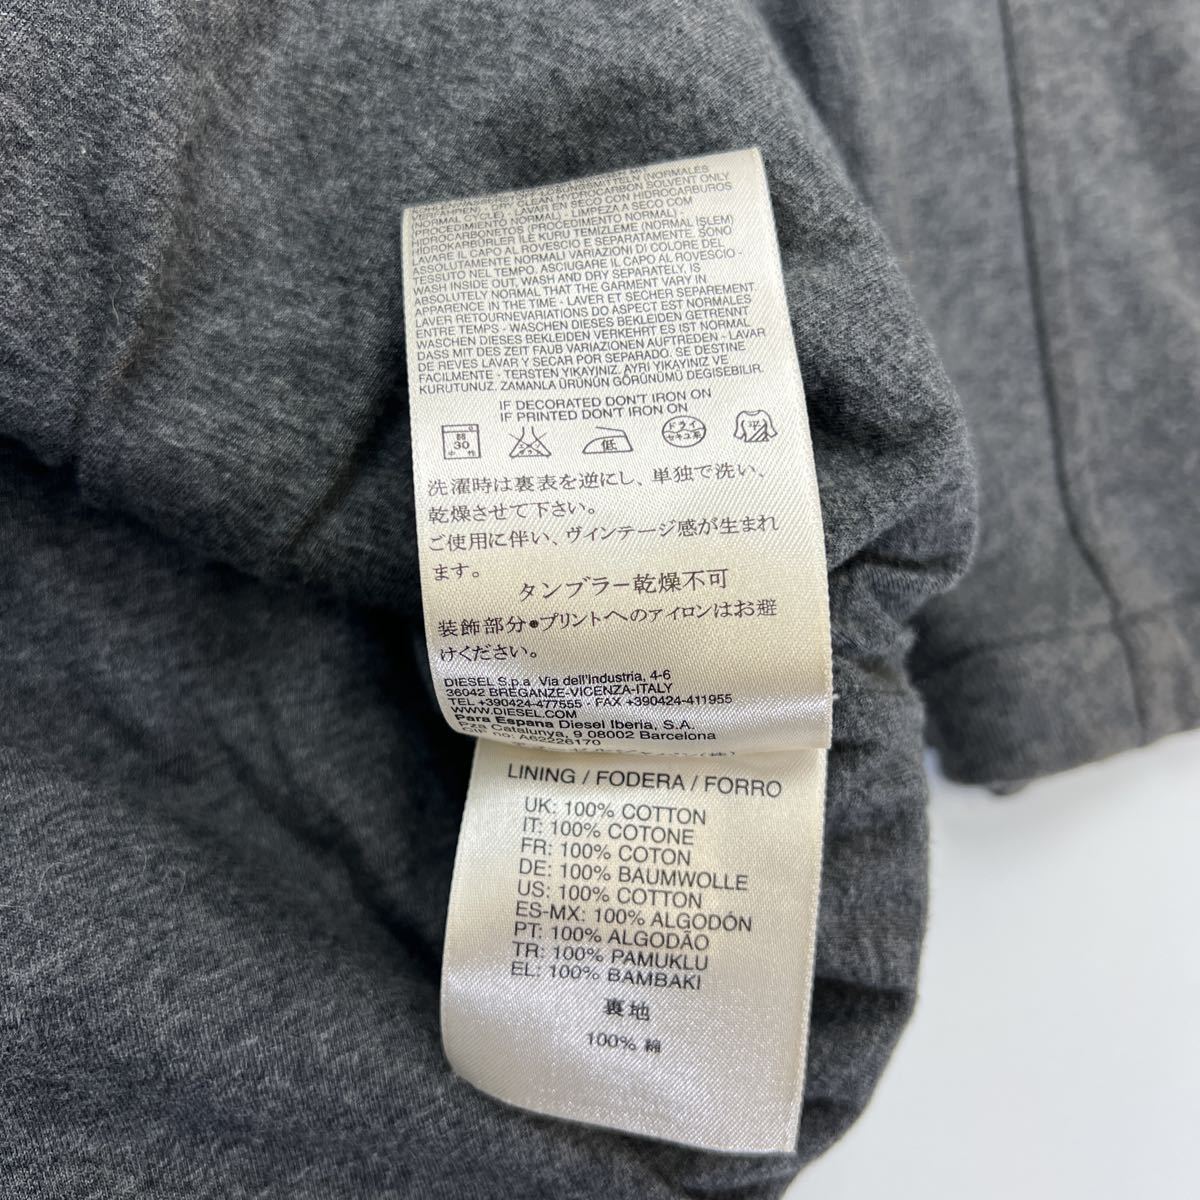  diesel * DIESEL.... put on turning! sweat Zip up coat lady's M charcoal gray cool . woman style #DK141